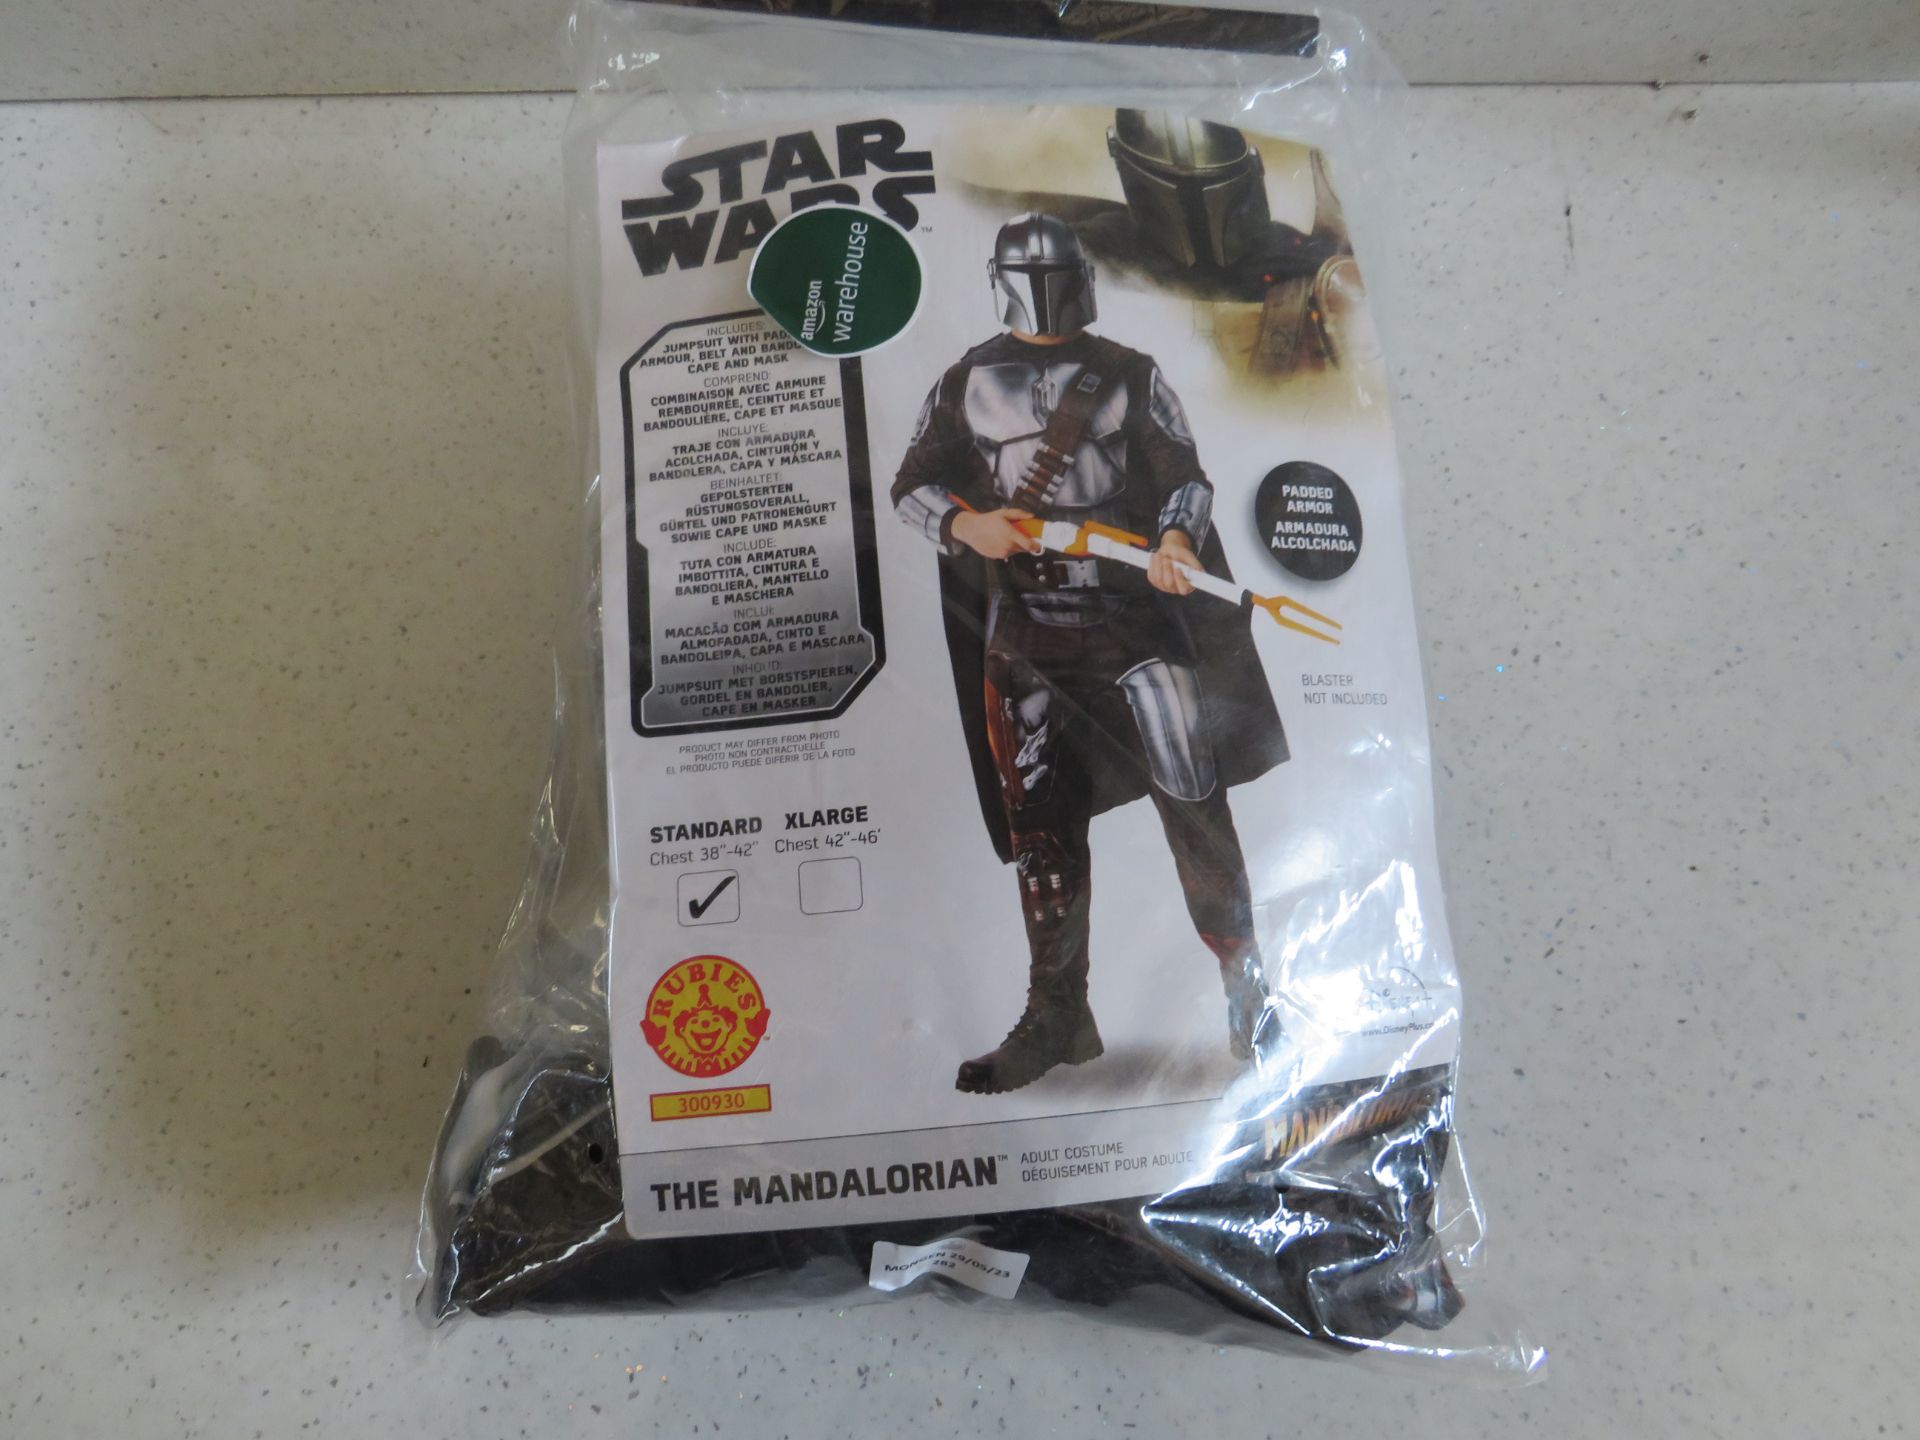 Rubies - Starwars The Mandalorian Costume - Size Chest 38" - 42" - Unchecked & Packaged.